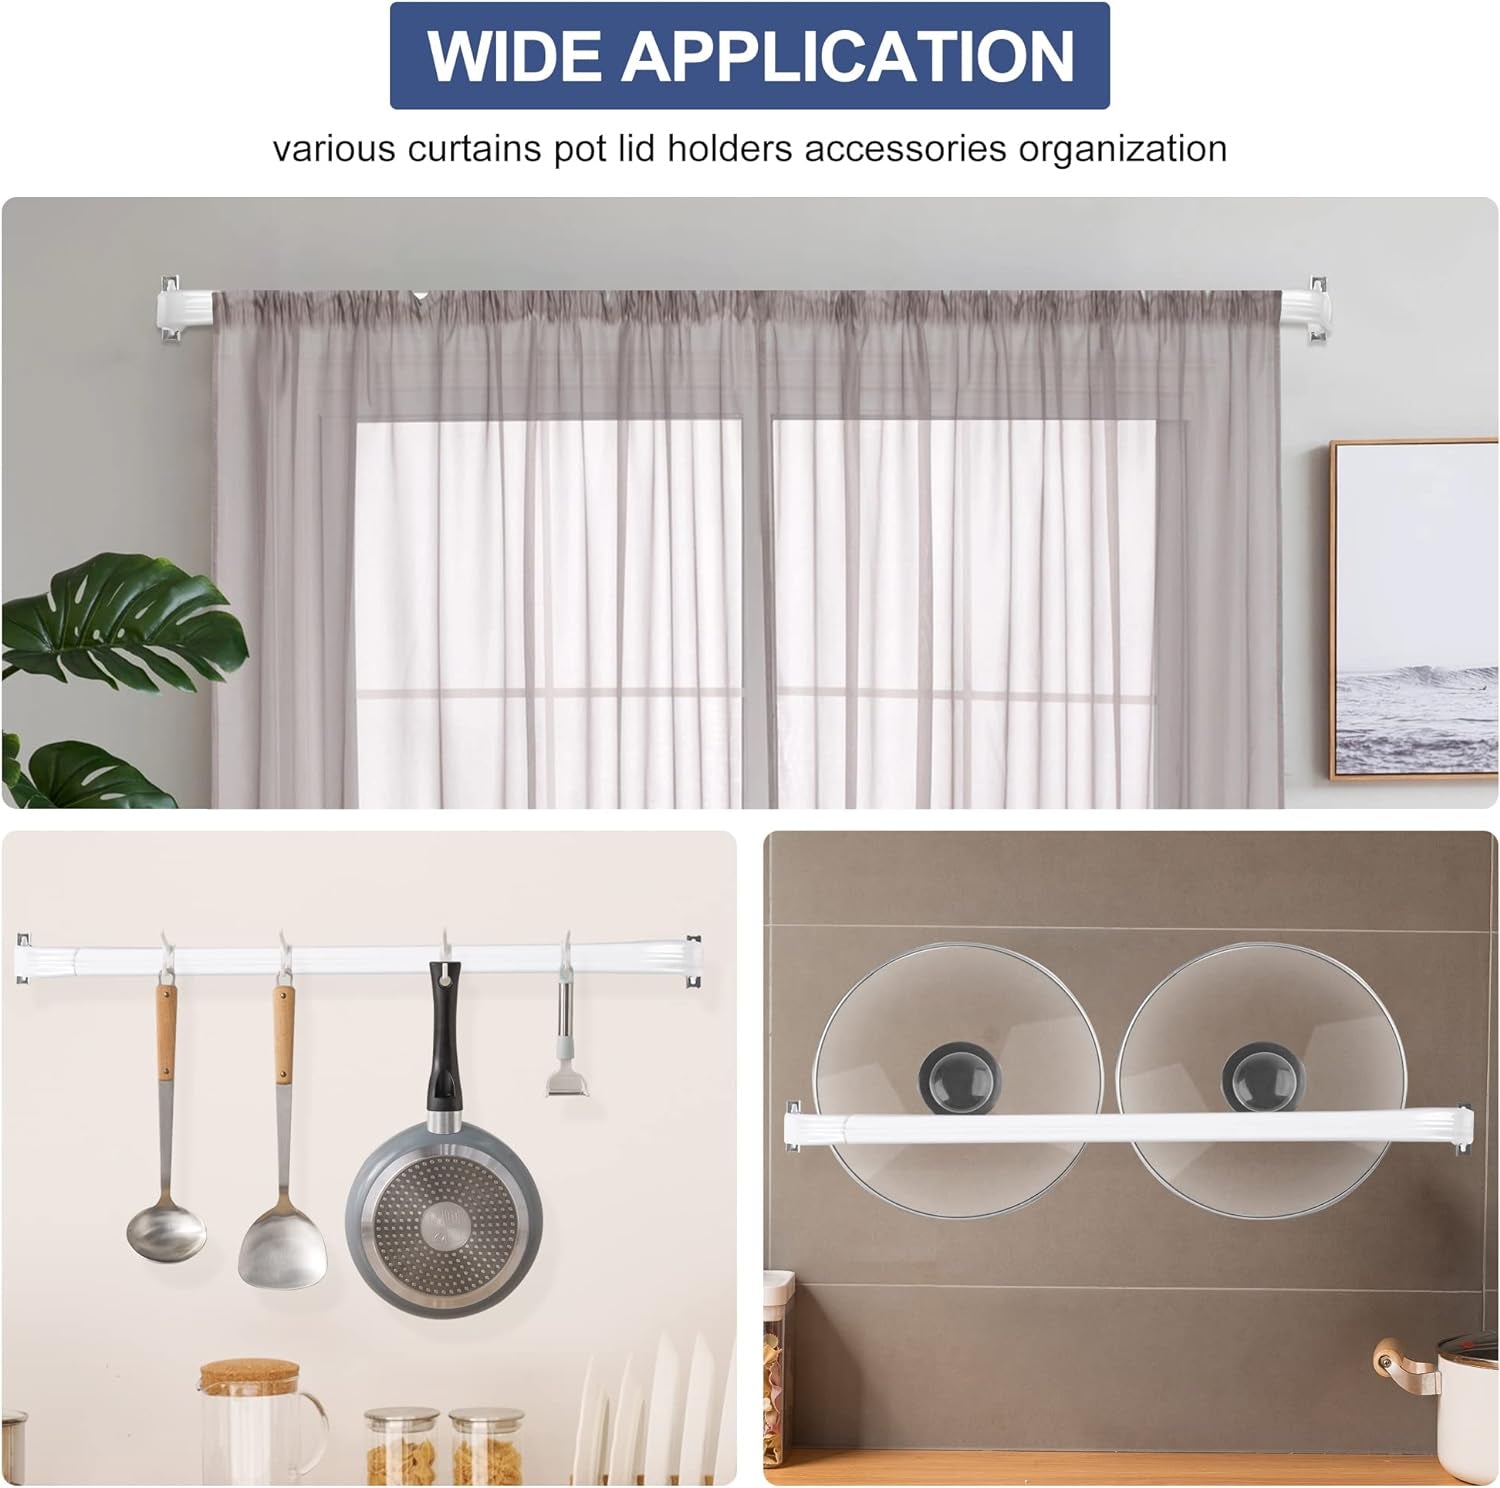 4 Pieces Adjustable Curtain Single Rod Heavy Duty Door Window Tension Rod Pan Lid Organizer for Home Valance Sash Curtains for Windows Doors Kitchen (32-79Inch)